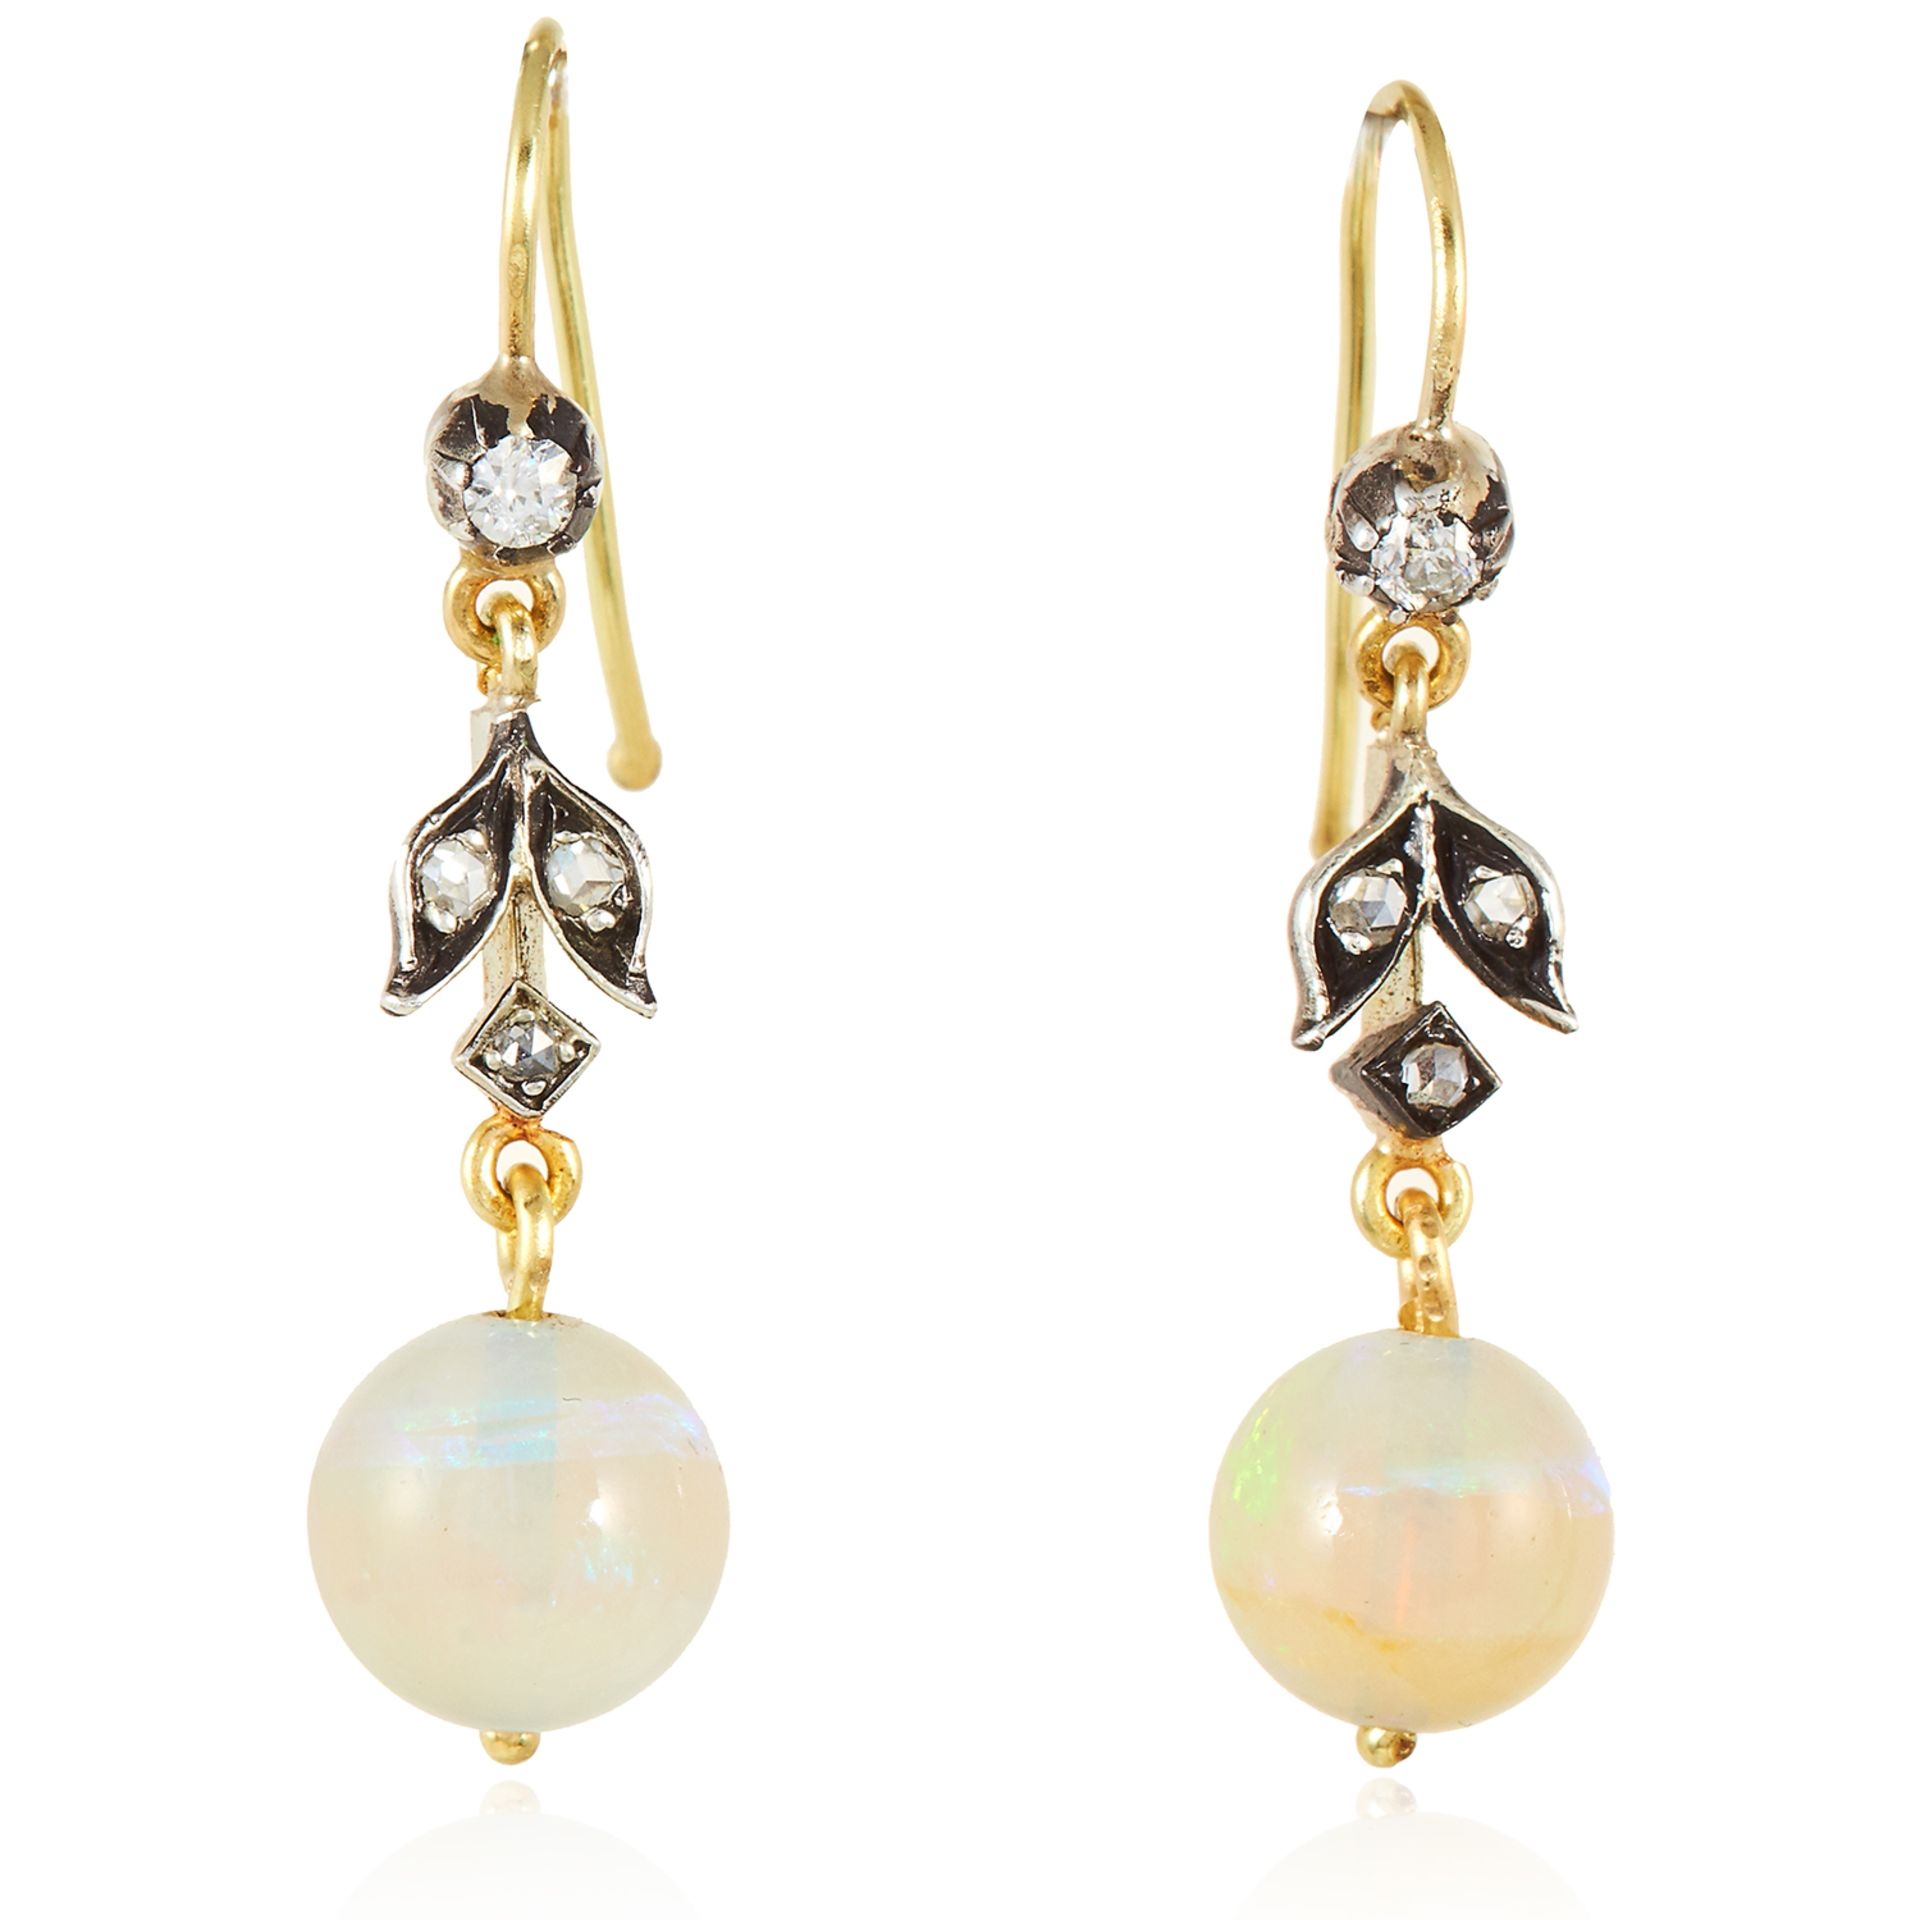 A PAIR OF ANTIQUE OPAL AND DIAMOND EARRINGS in yellow gold and silver, each set with a polished opal